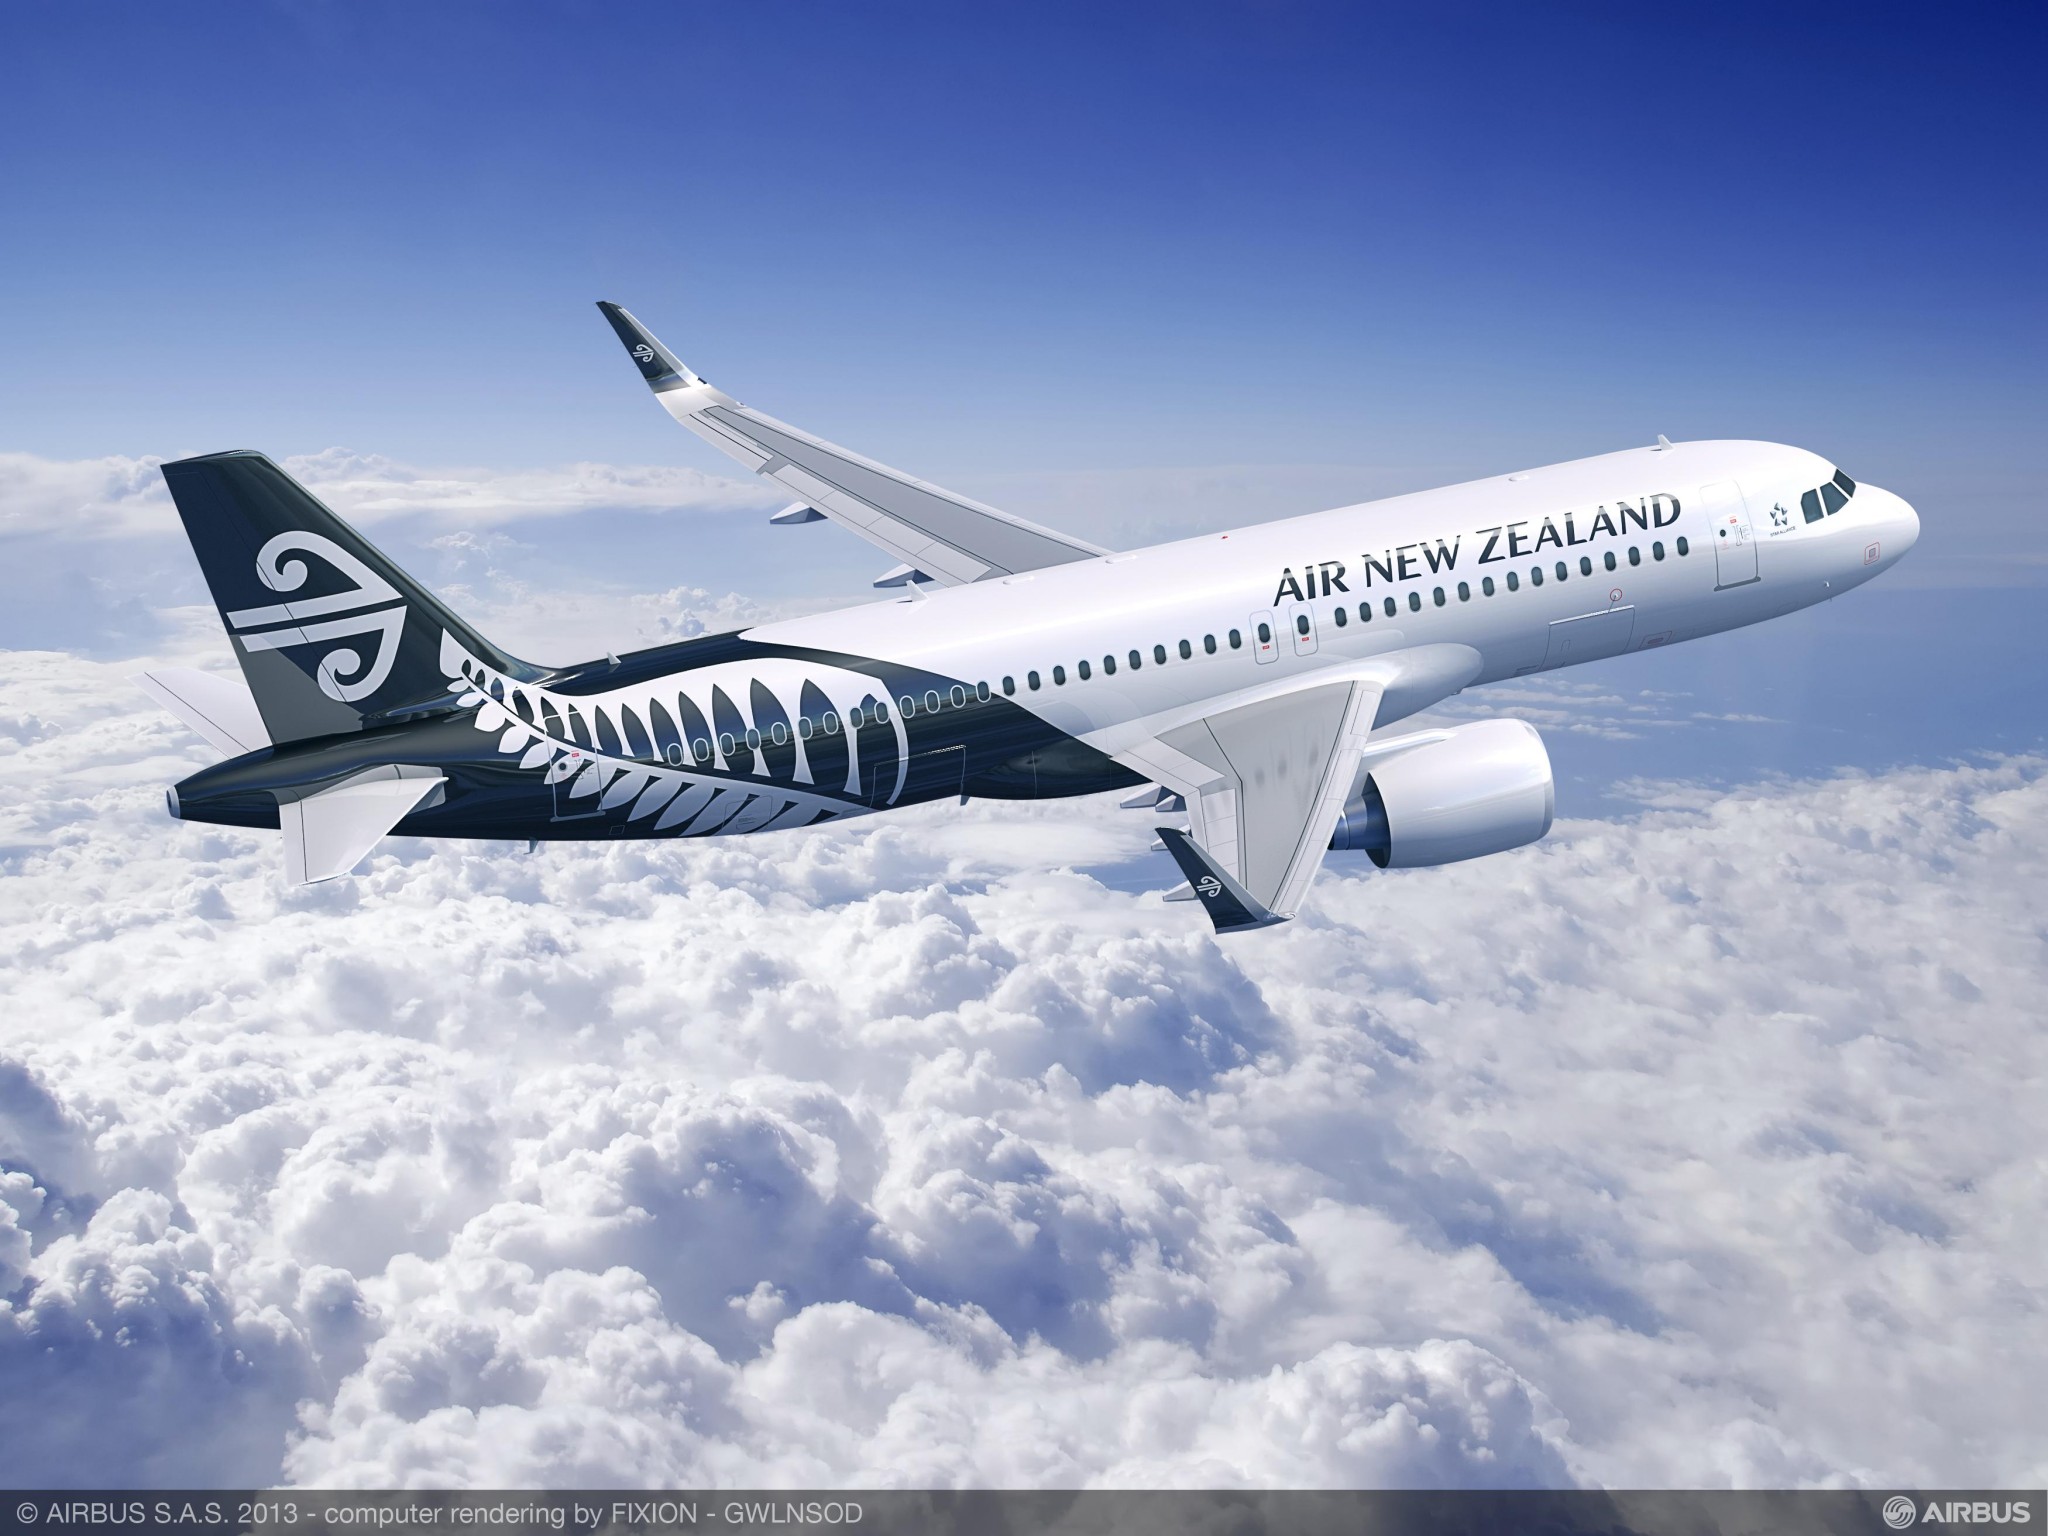 Air New Zealand gears up for a busy holiday season